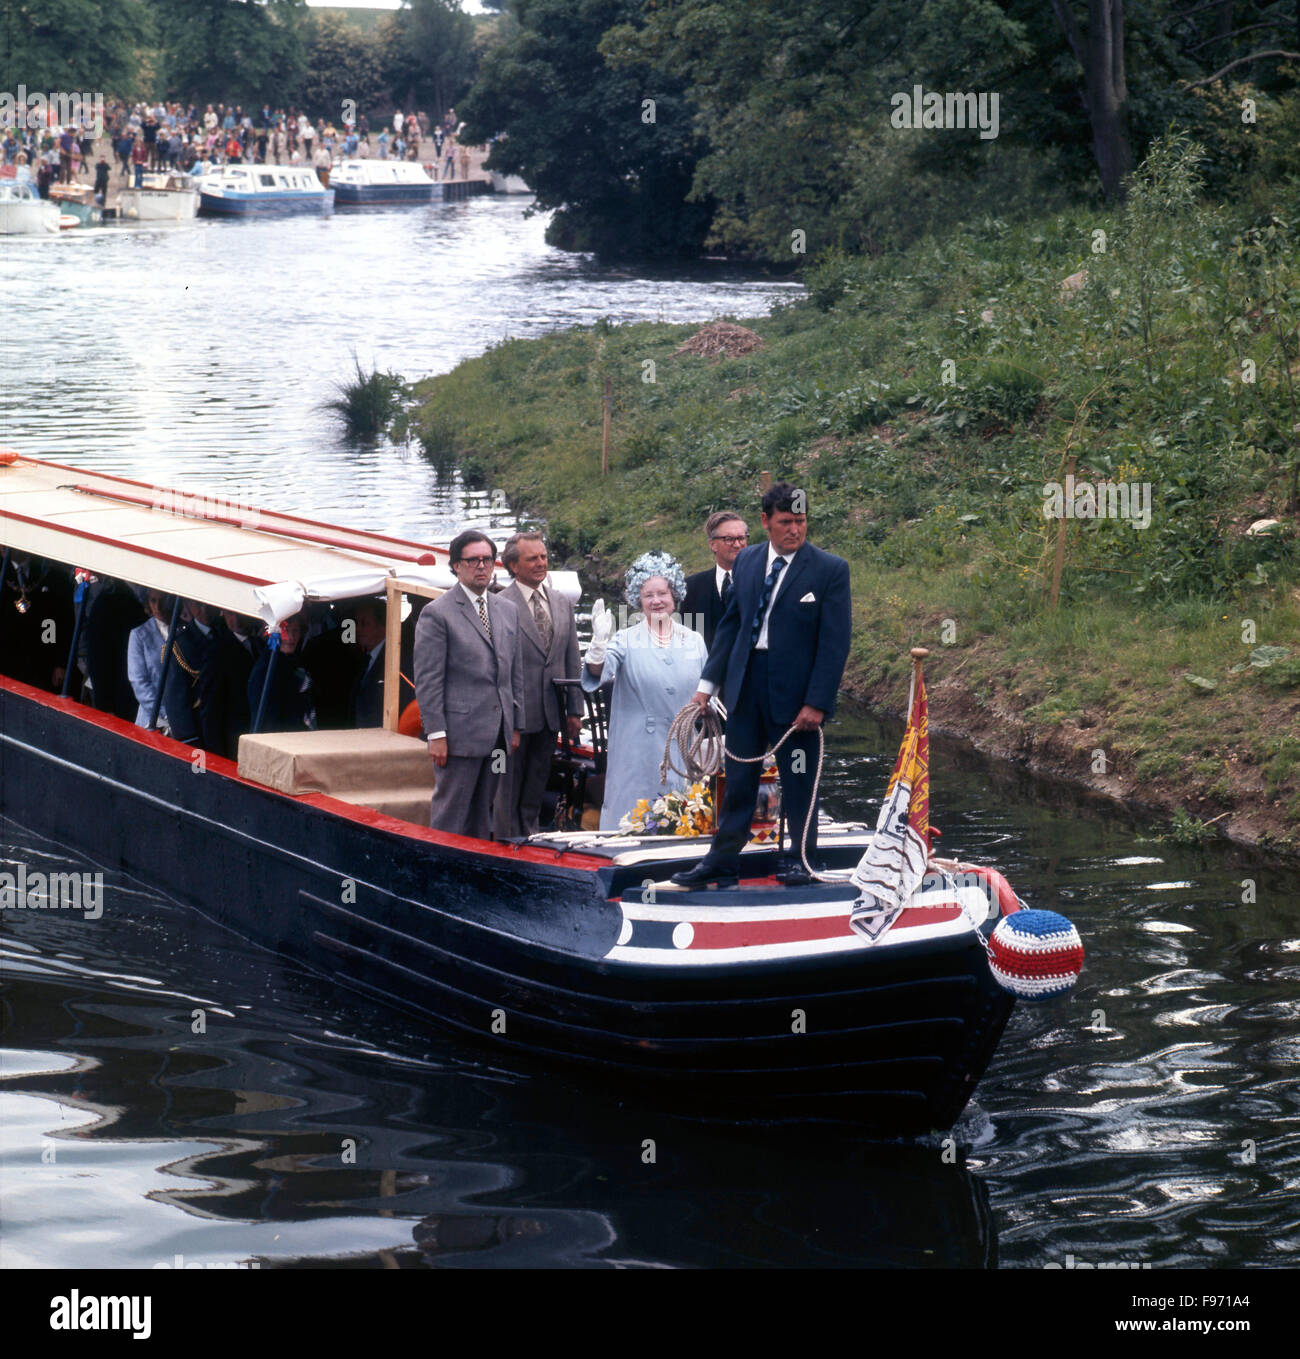 The Upper Avon canal was officially reopened by HM Queen Elizabeth the Queen Mother on JUne 1st 1974. With her are Robert Aickman, David Hutchings and Crick Grundy. Stock Photo